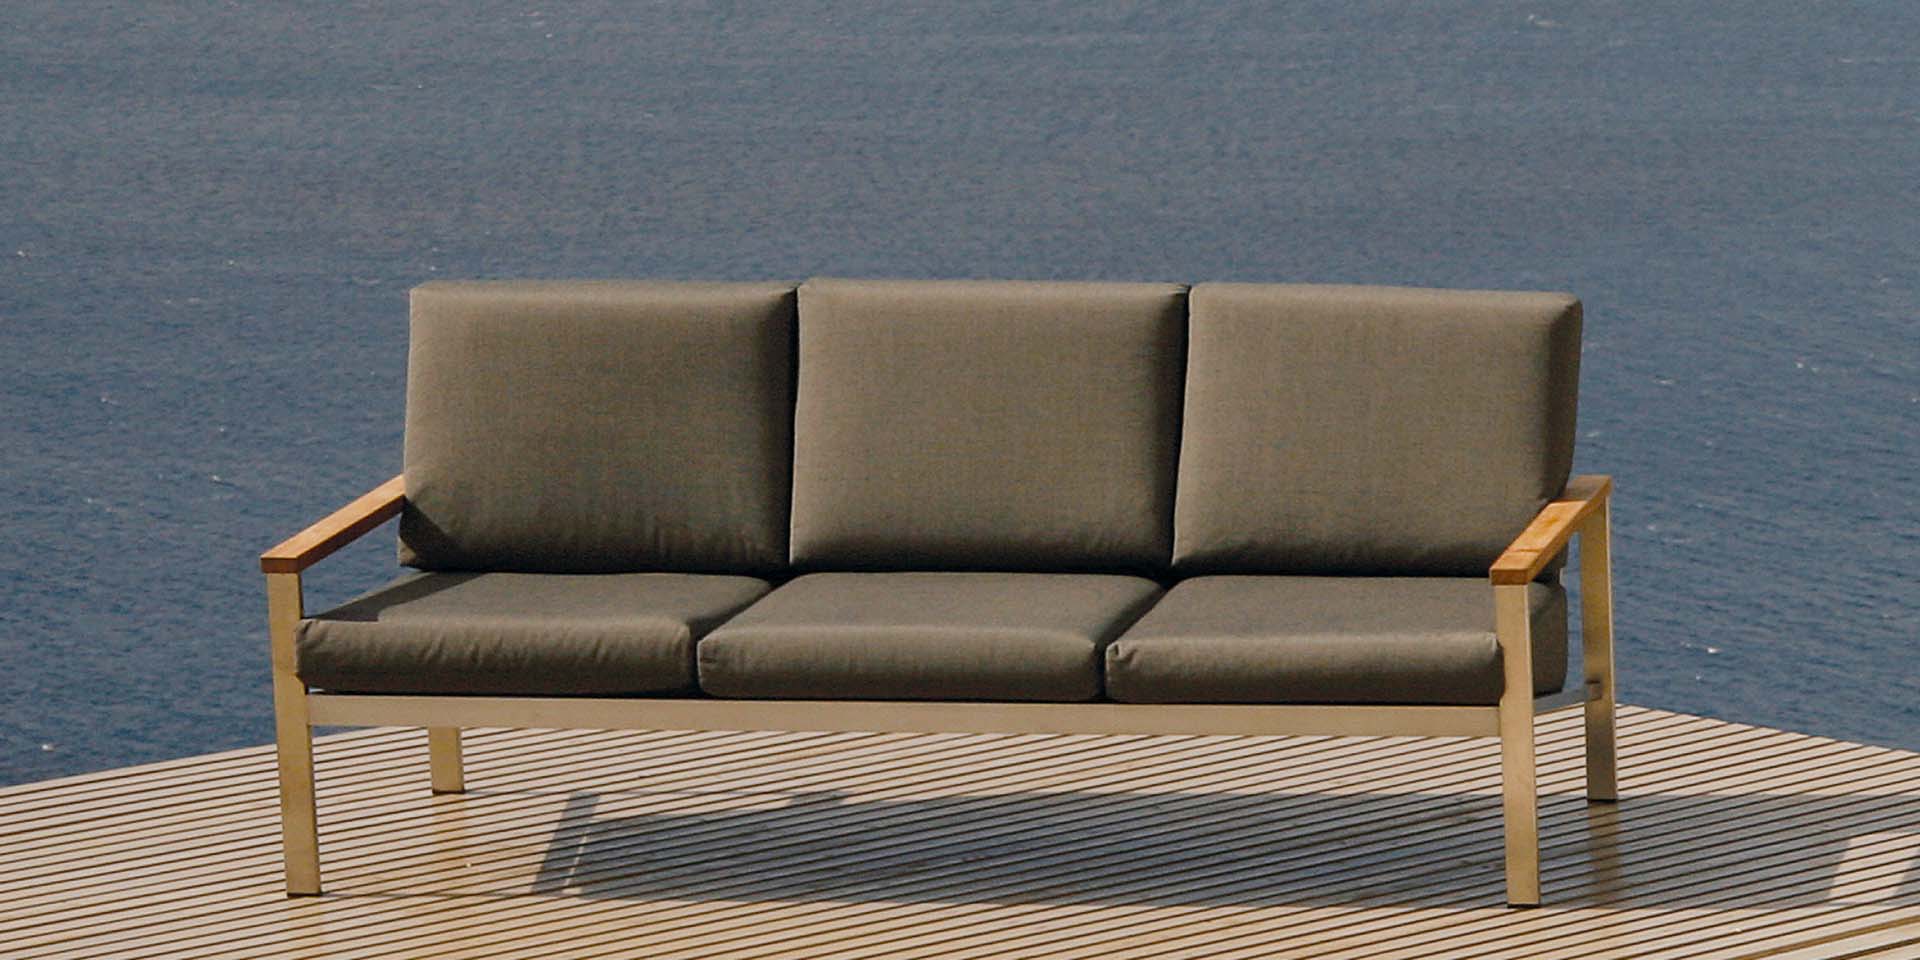 Equinox Occasional Deep Seating Ottoman - Powder coated